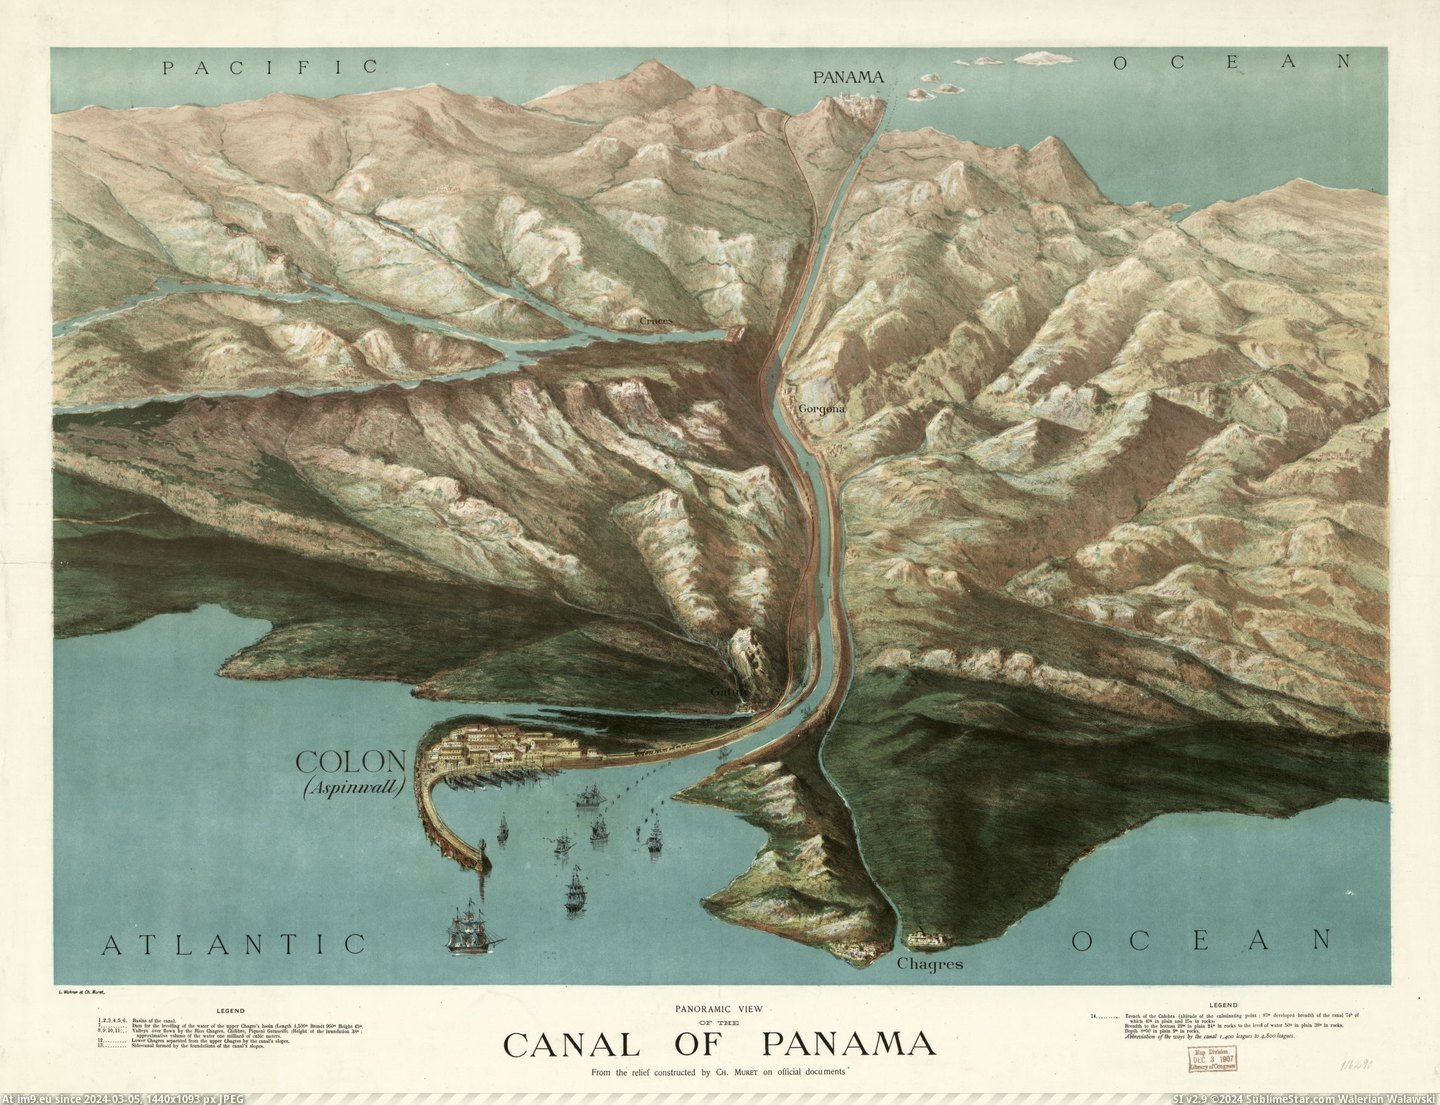 #Panoramic #Panama #Constructed #Canal #Relief [Mapporn] Panoramic view of the canal of Panama, From the relief constructed by Ch. Muret - 1881 [2285x1746] Pic. (Изображение из альбом My r/MAPS favs))